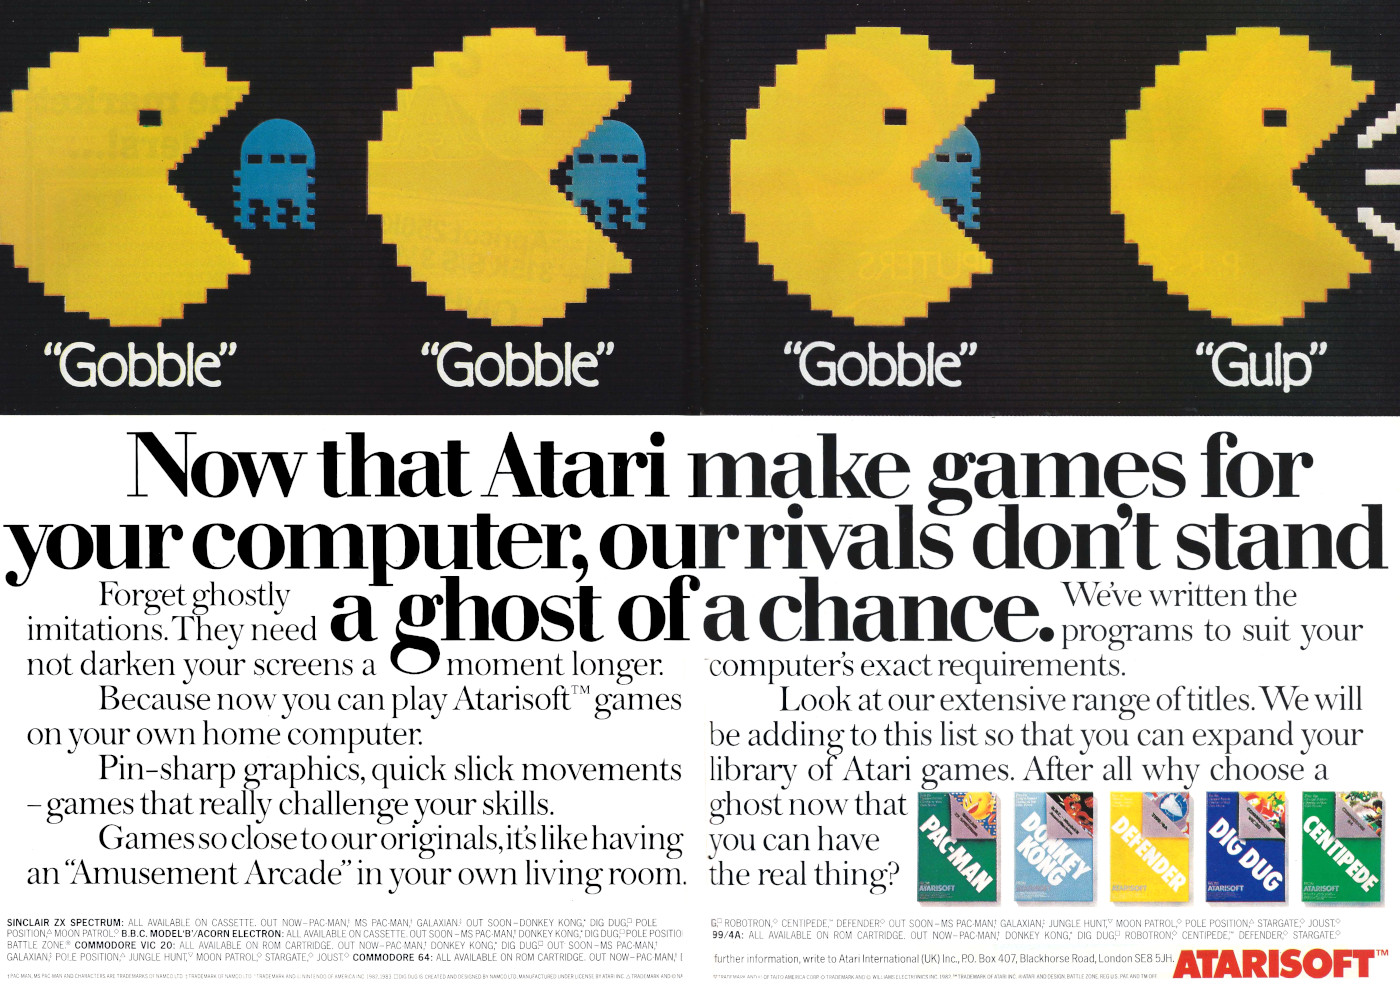 An advert from Atarisoft, which features a dig at cl<span class='hilite'>on</span>es of the company's games, like Commodore's versi<span class='hilite'>on</span> of Pac-Man, which it called Jelly M<span class='hilite'>on</span>sters after legal pressure from Atari. From Pers<span class='hilite'>on</span>al Computer World, March 1984